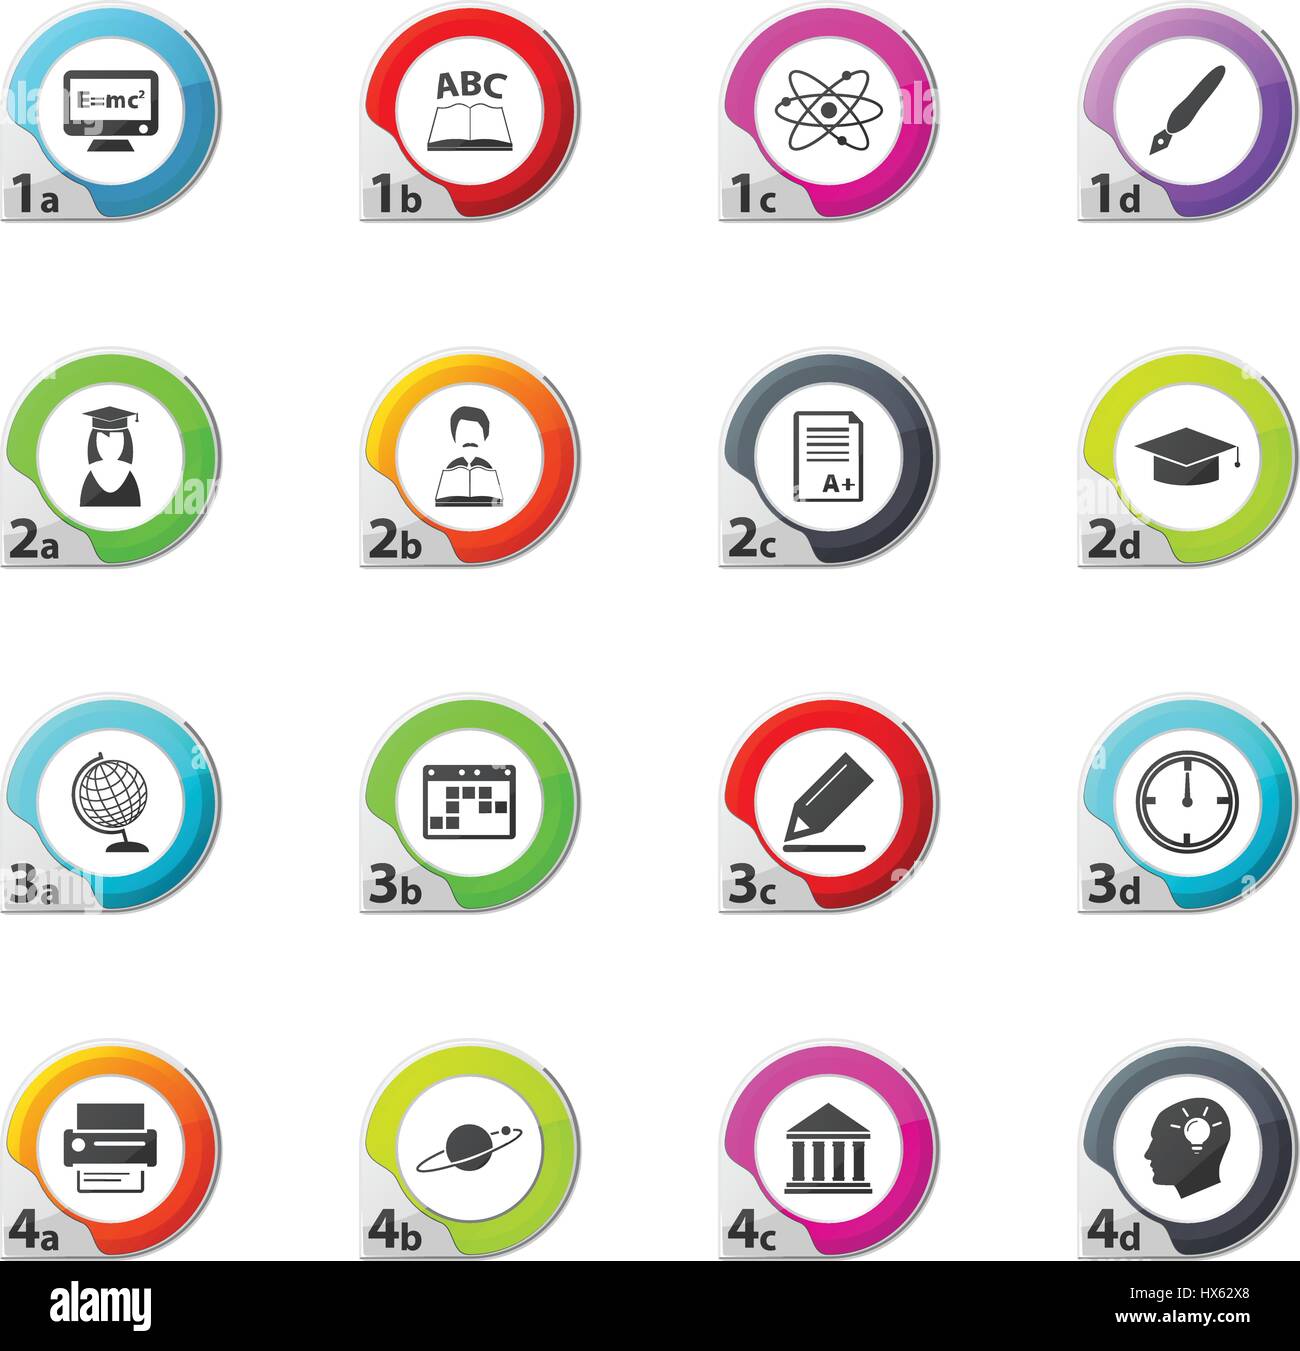 University web icons for user interface design Stock Vector